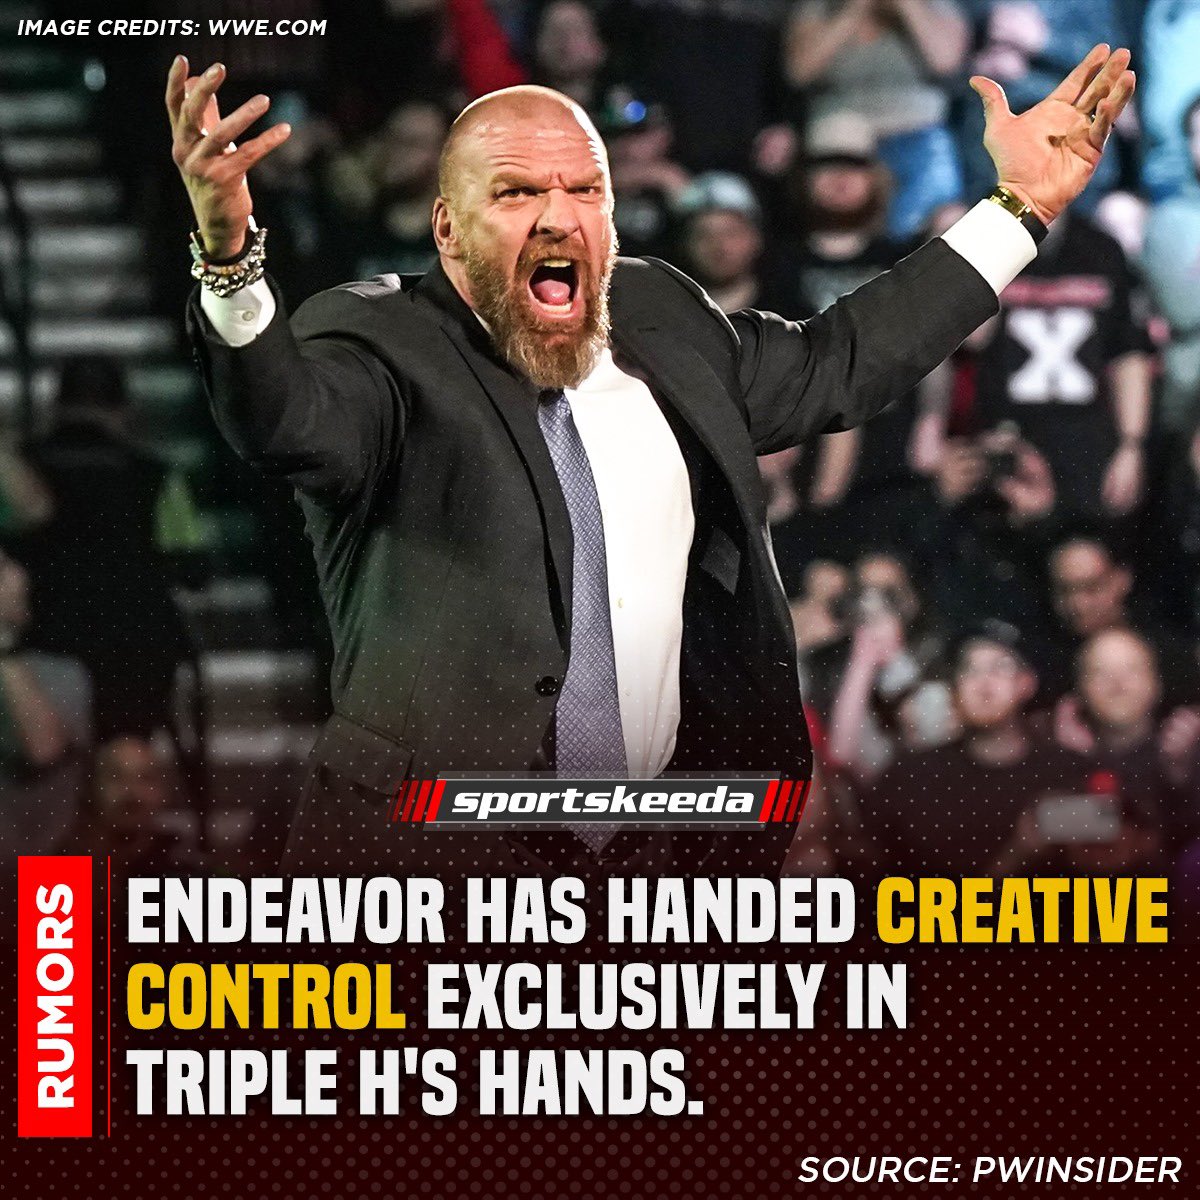 There is now a belief inside the company that #VinceMcMahon is NO longer in control of creative decisions, and that #TripleH has been knighted the creative control exclusively. #WWE